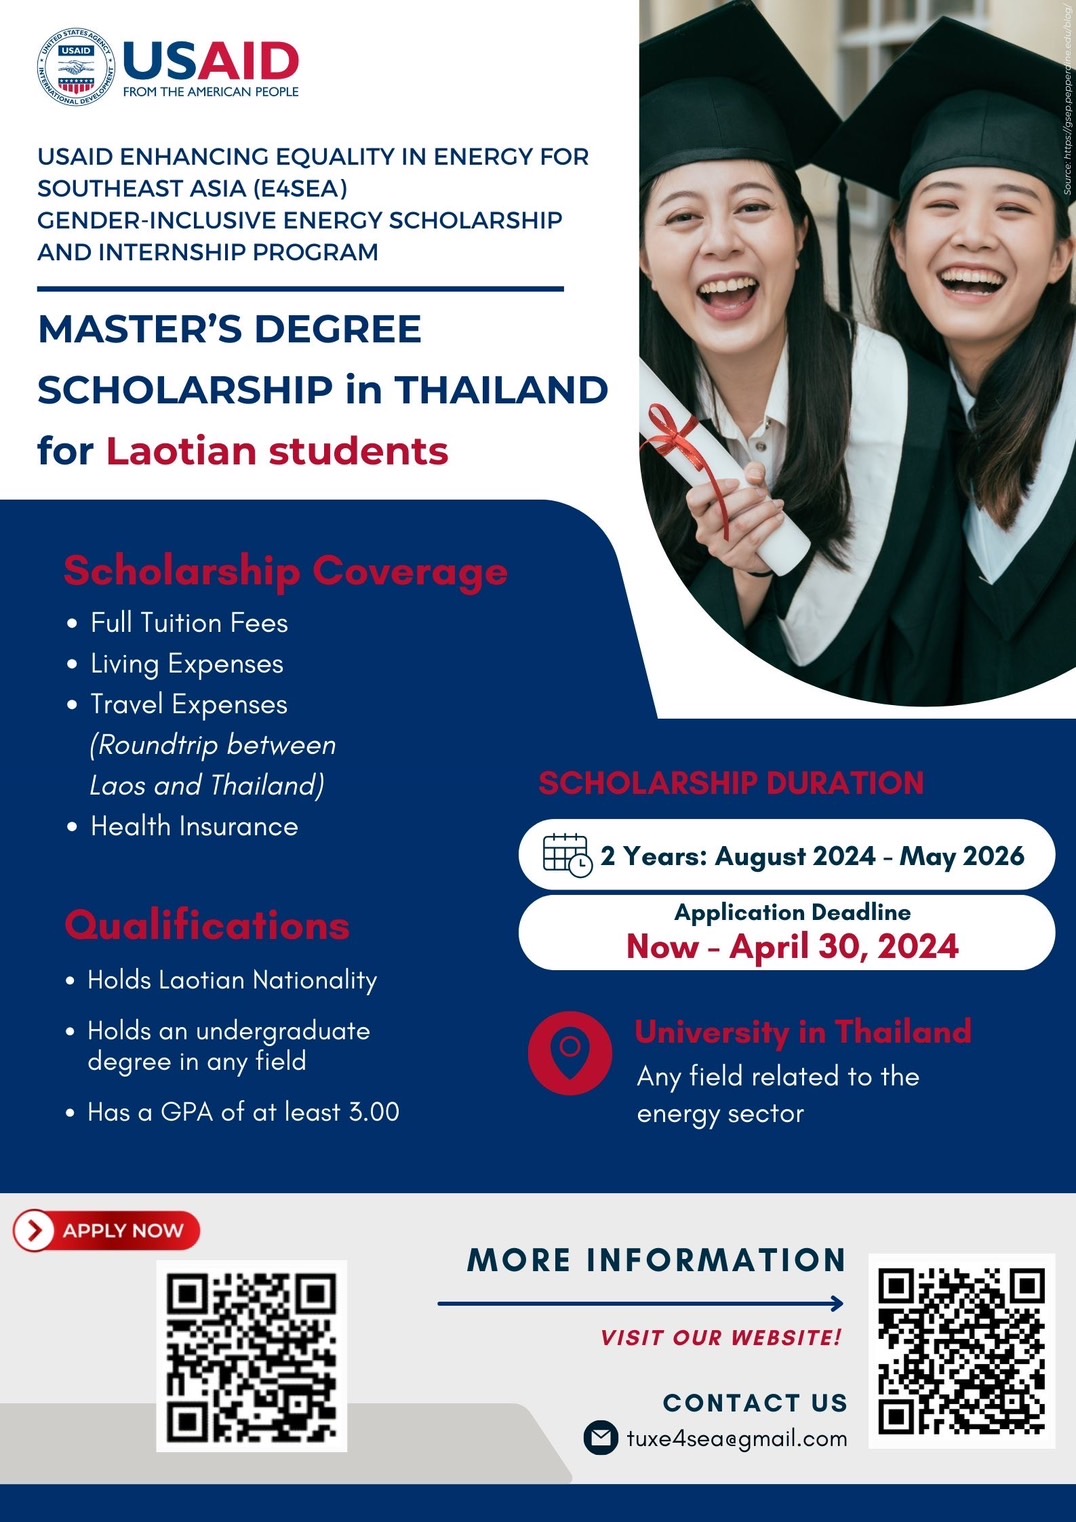 Master's Degree Scholarship in Thailand for Laotian students